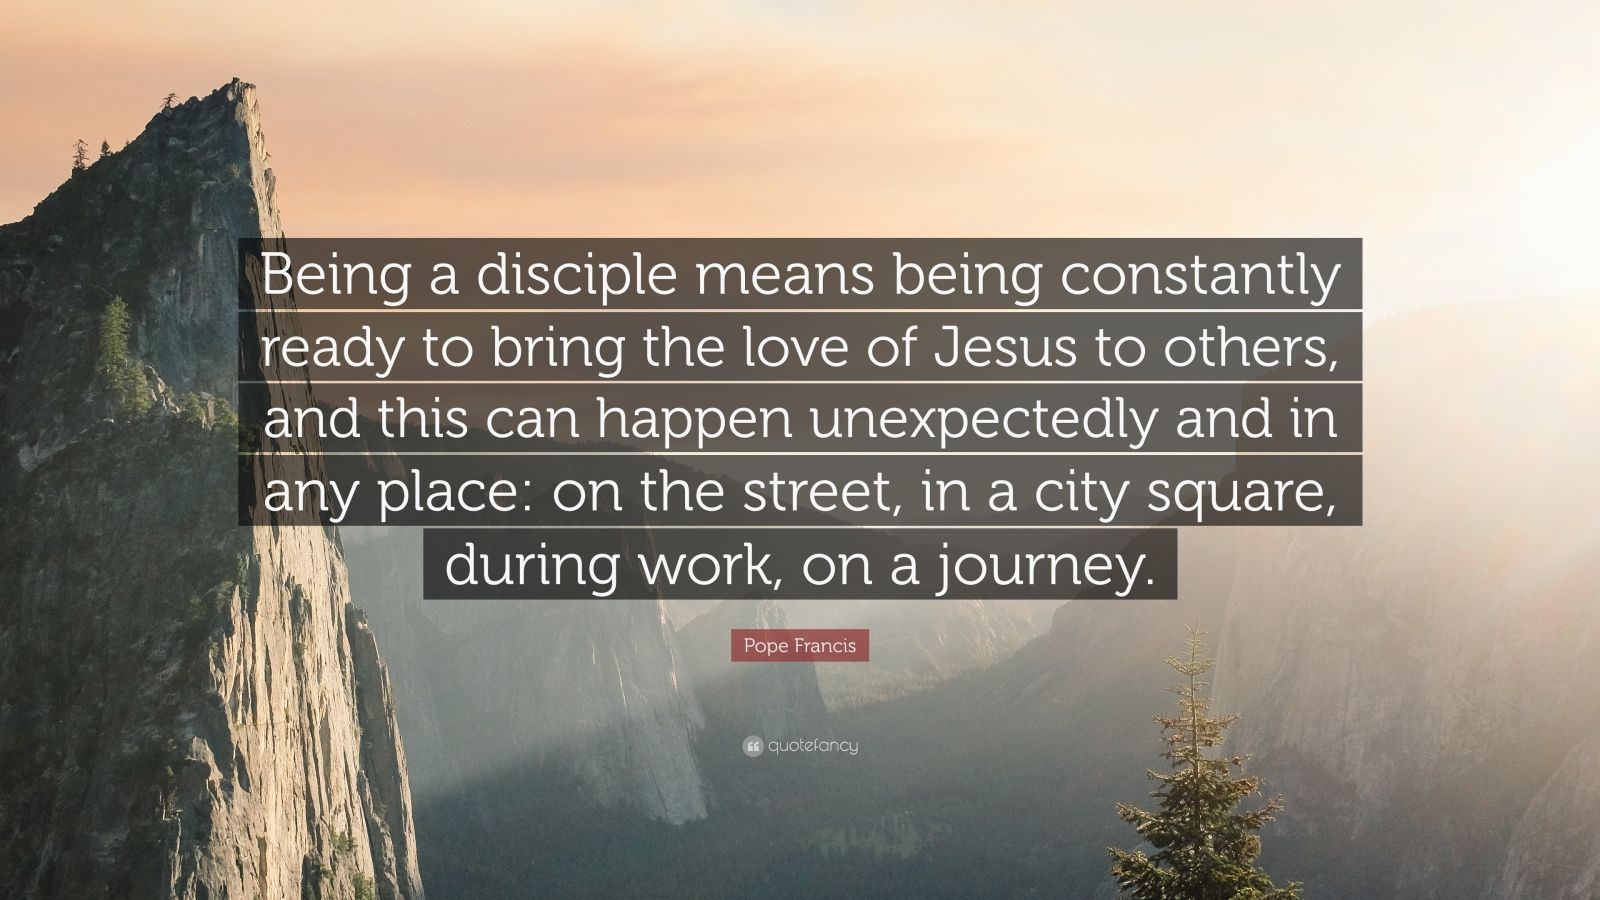 Pope Francis Quote: “Being a disciple means being constantly ready to